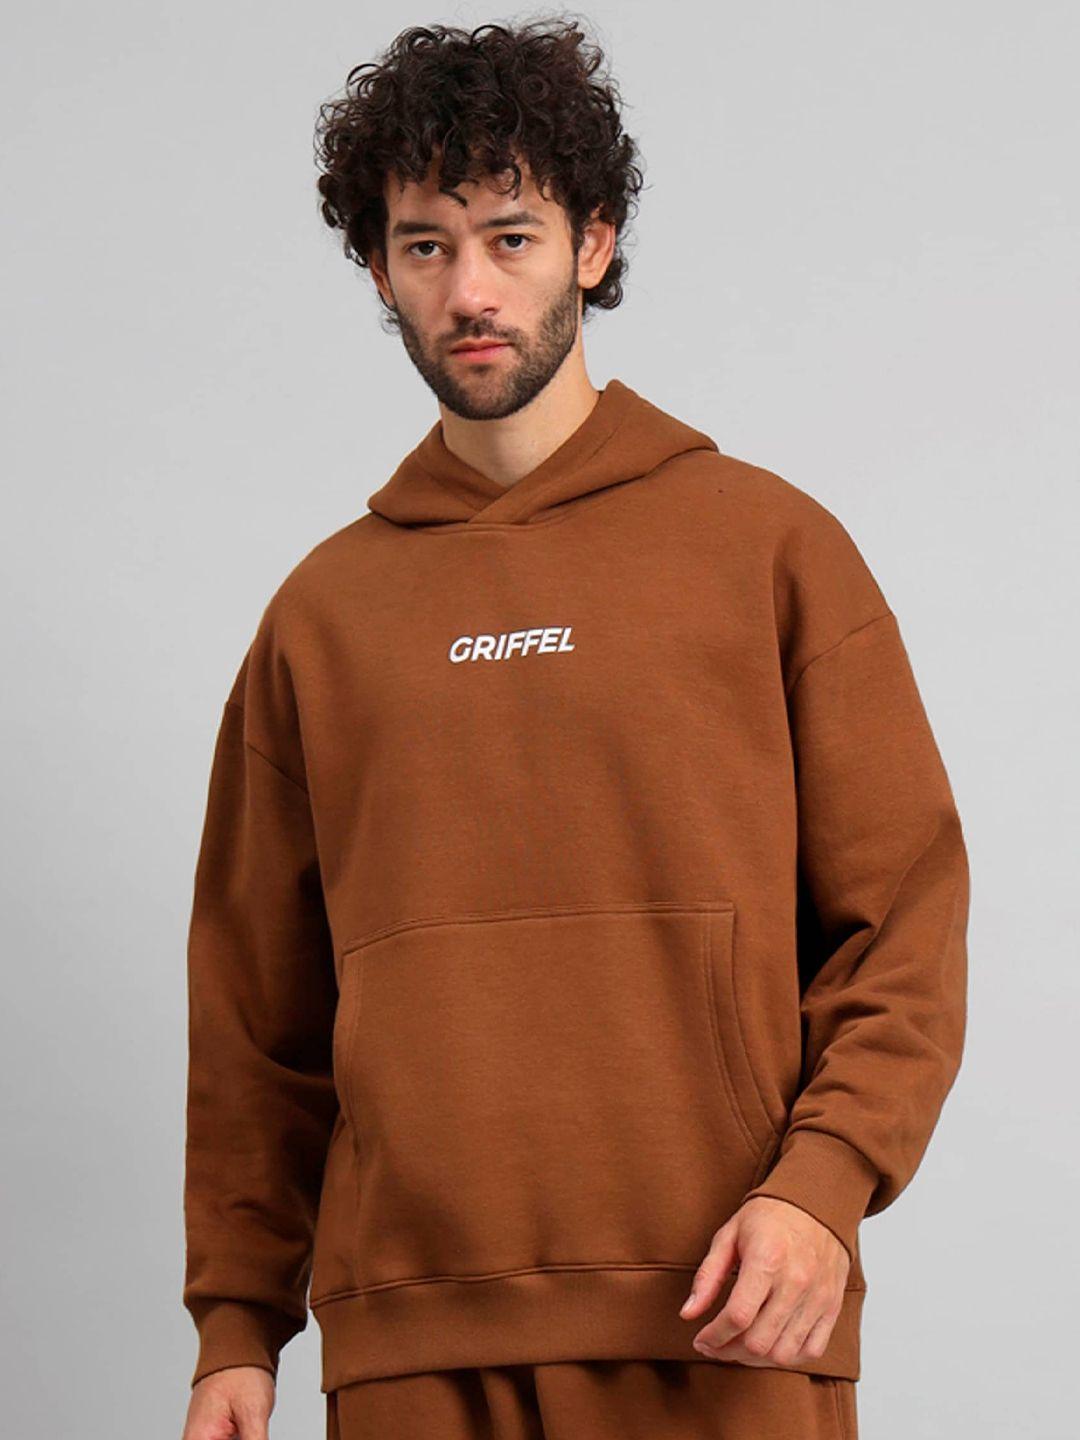 griffel-hooded-pullover